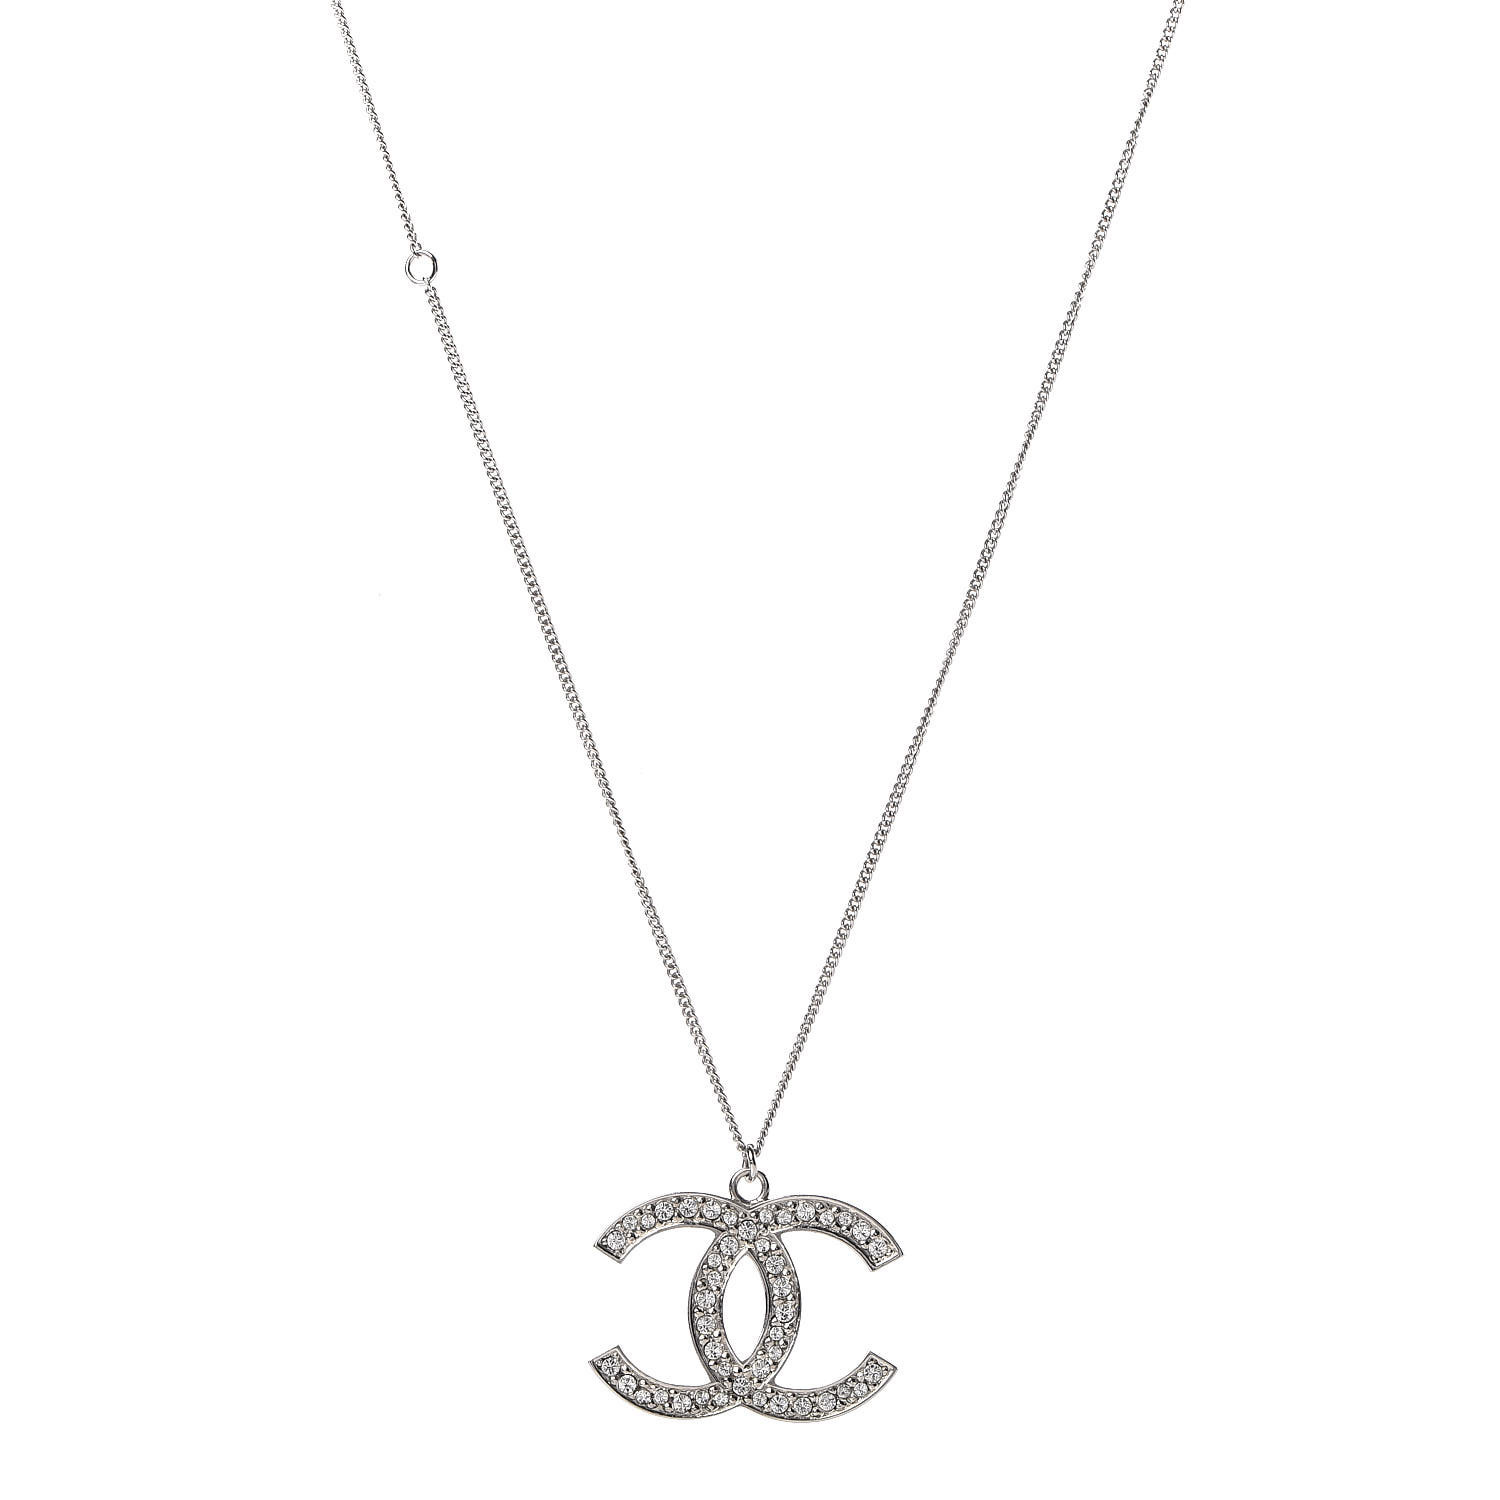 Chanel Pendant Necklace
 CHANEL Crystal CC Pendant Necklace Silver